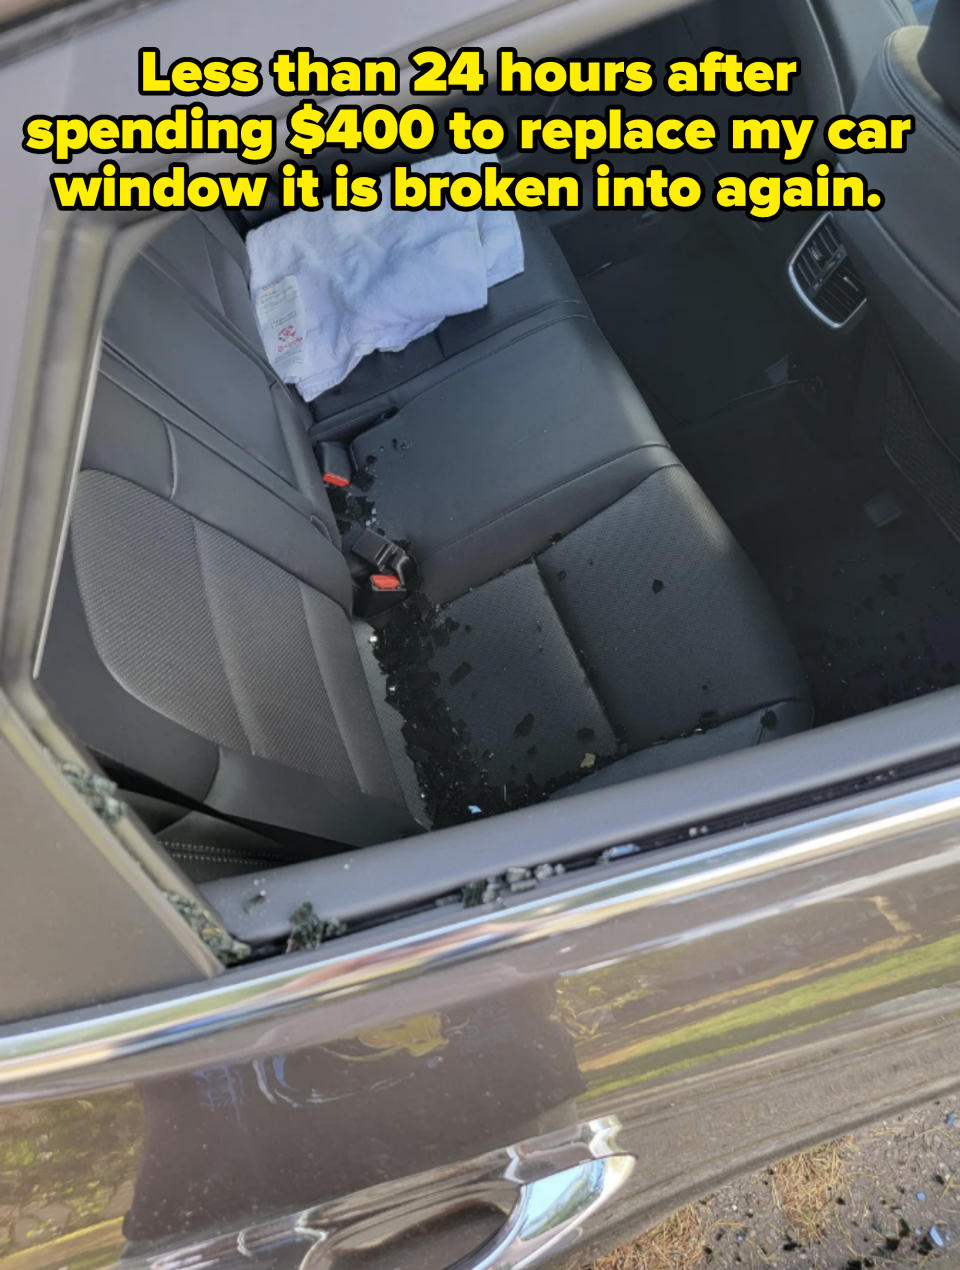 Car's back seat through an open door, with debris and a white towel on the seat